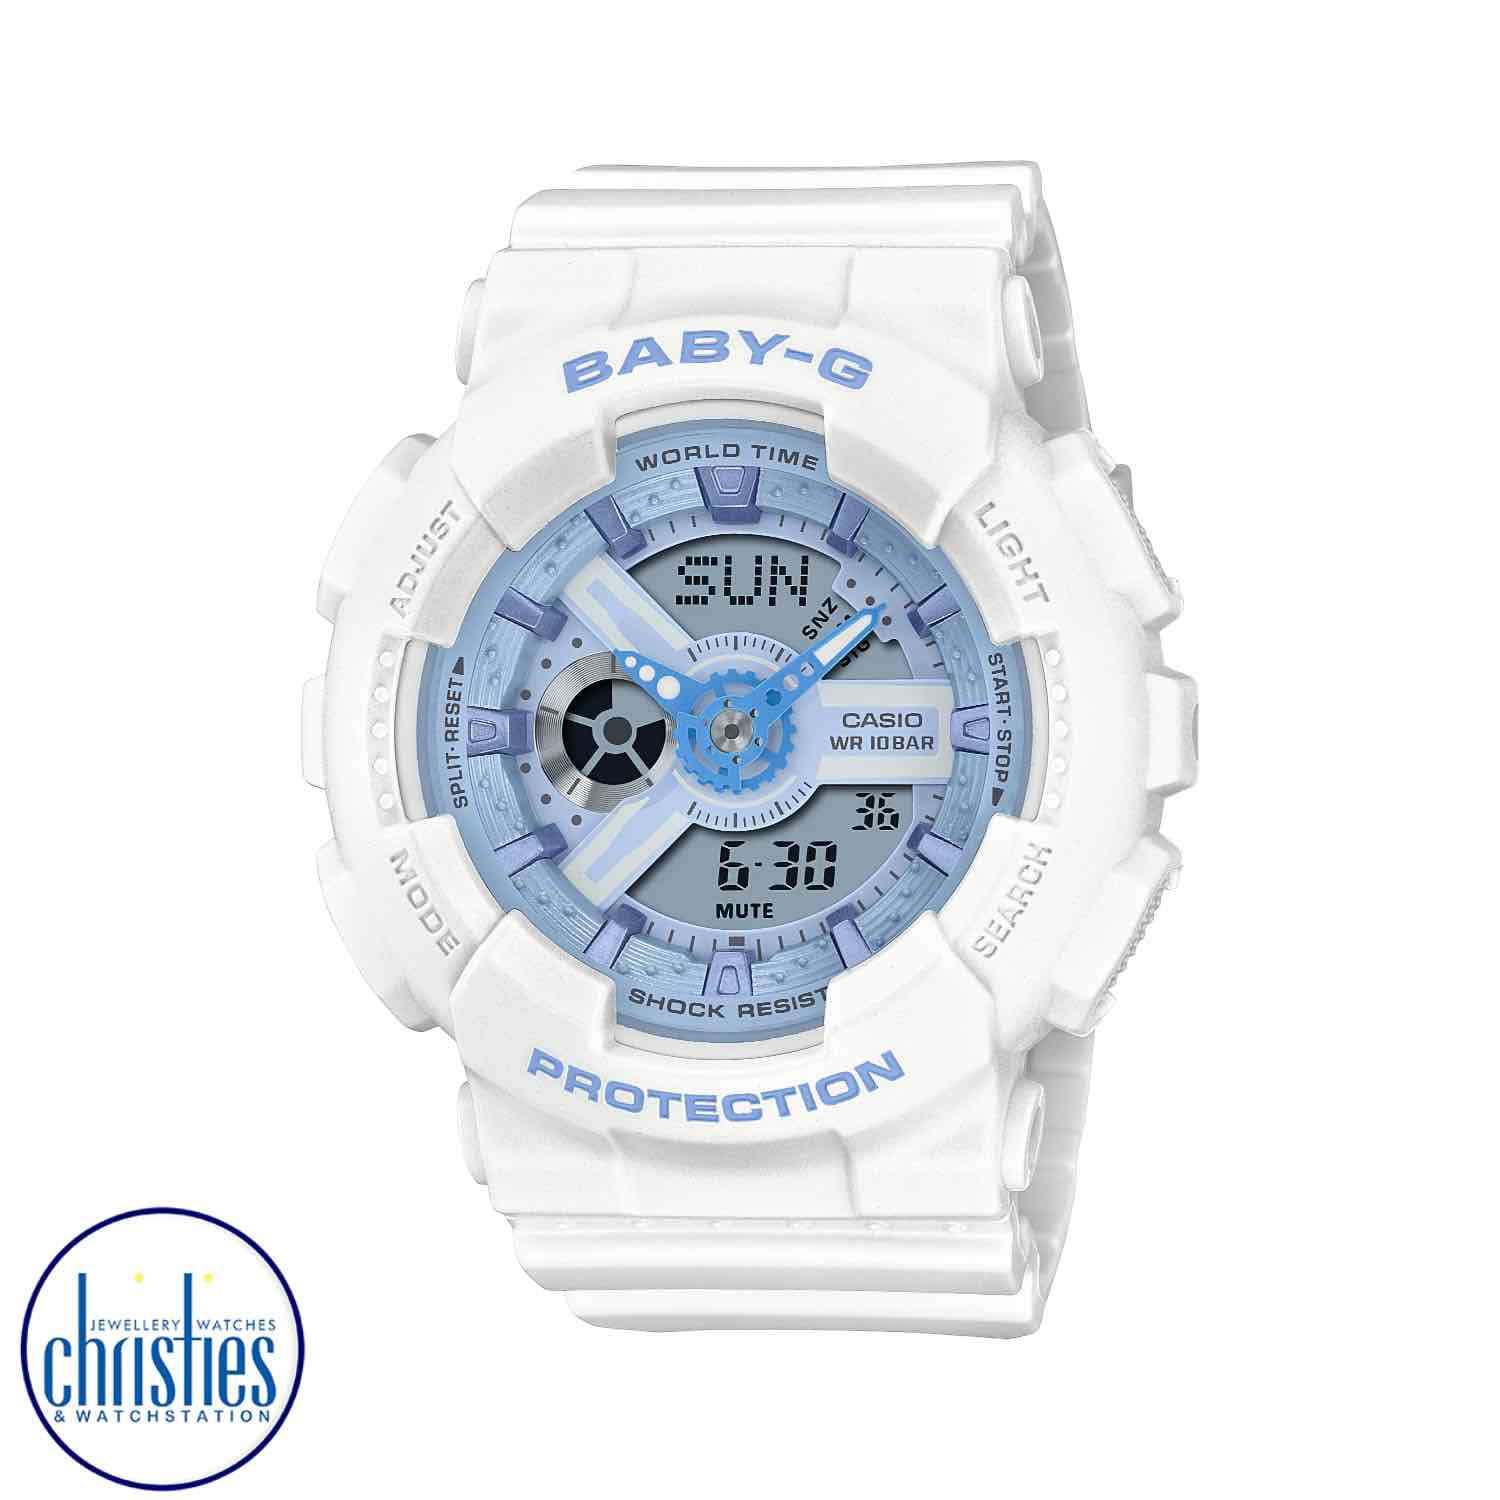 BA110XBE-7A Casio BABY-G Ana-Digi Watch. Slip on a splash of clean, fresh colour with an eye-catcher inspired by the popular design of the G-SHOCK GA-110. g-shock watch strap replacement nz